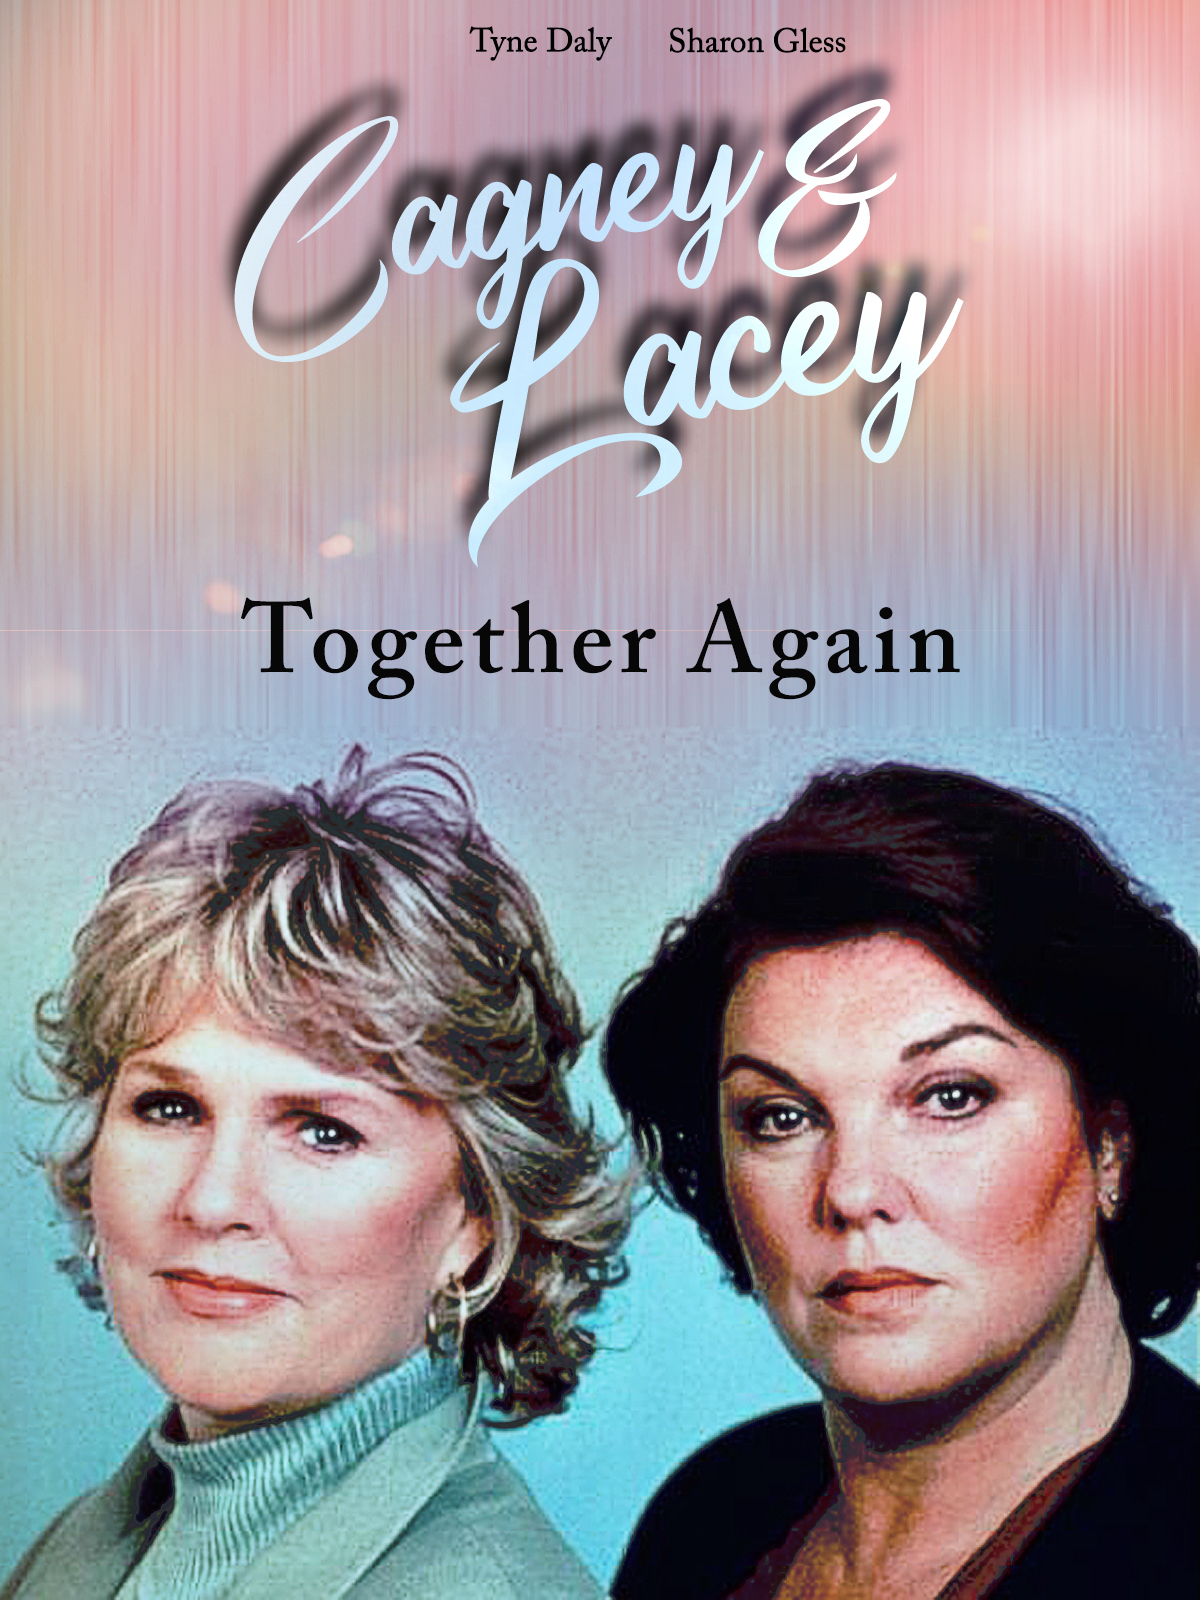 Cagney & Lacey: Together Again (1995) Screenshot 2 